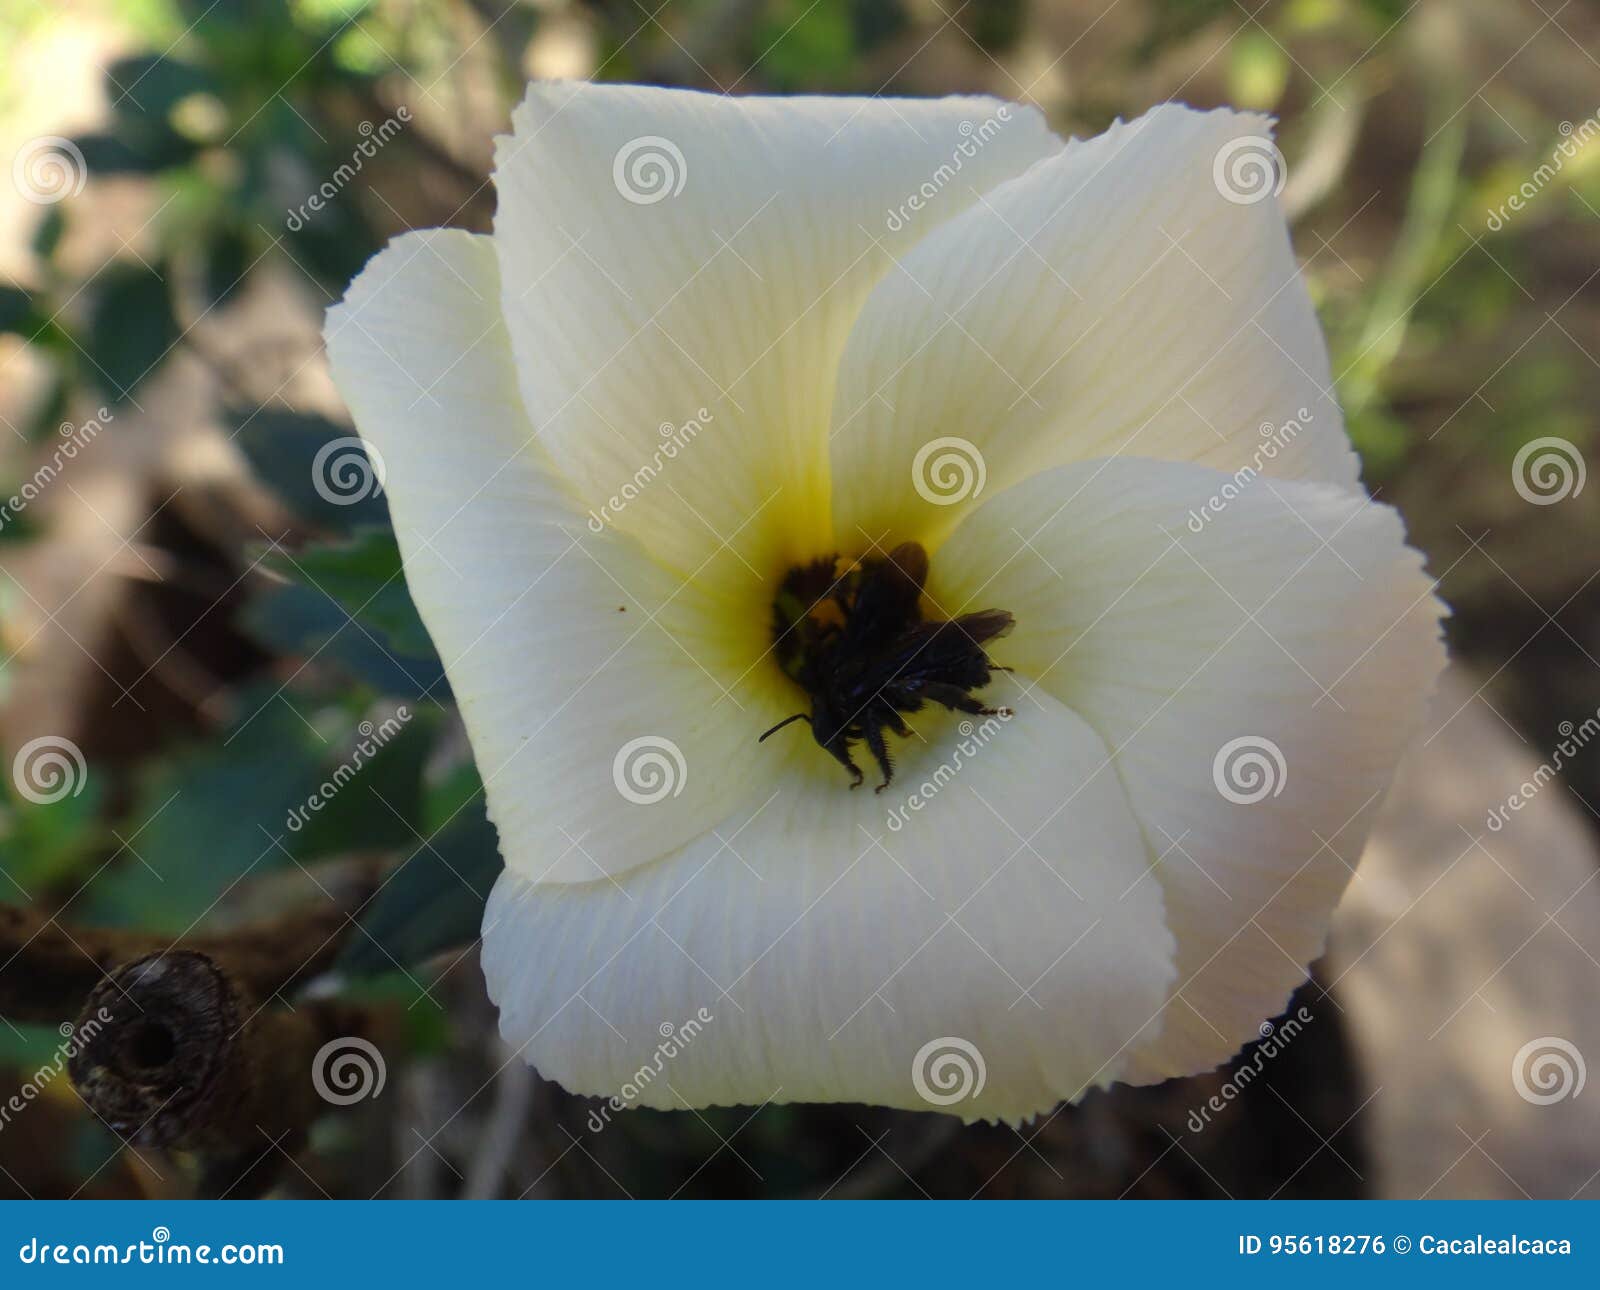 Flower of Sida sp. stock photo. Image of bloom, detail - 95618276